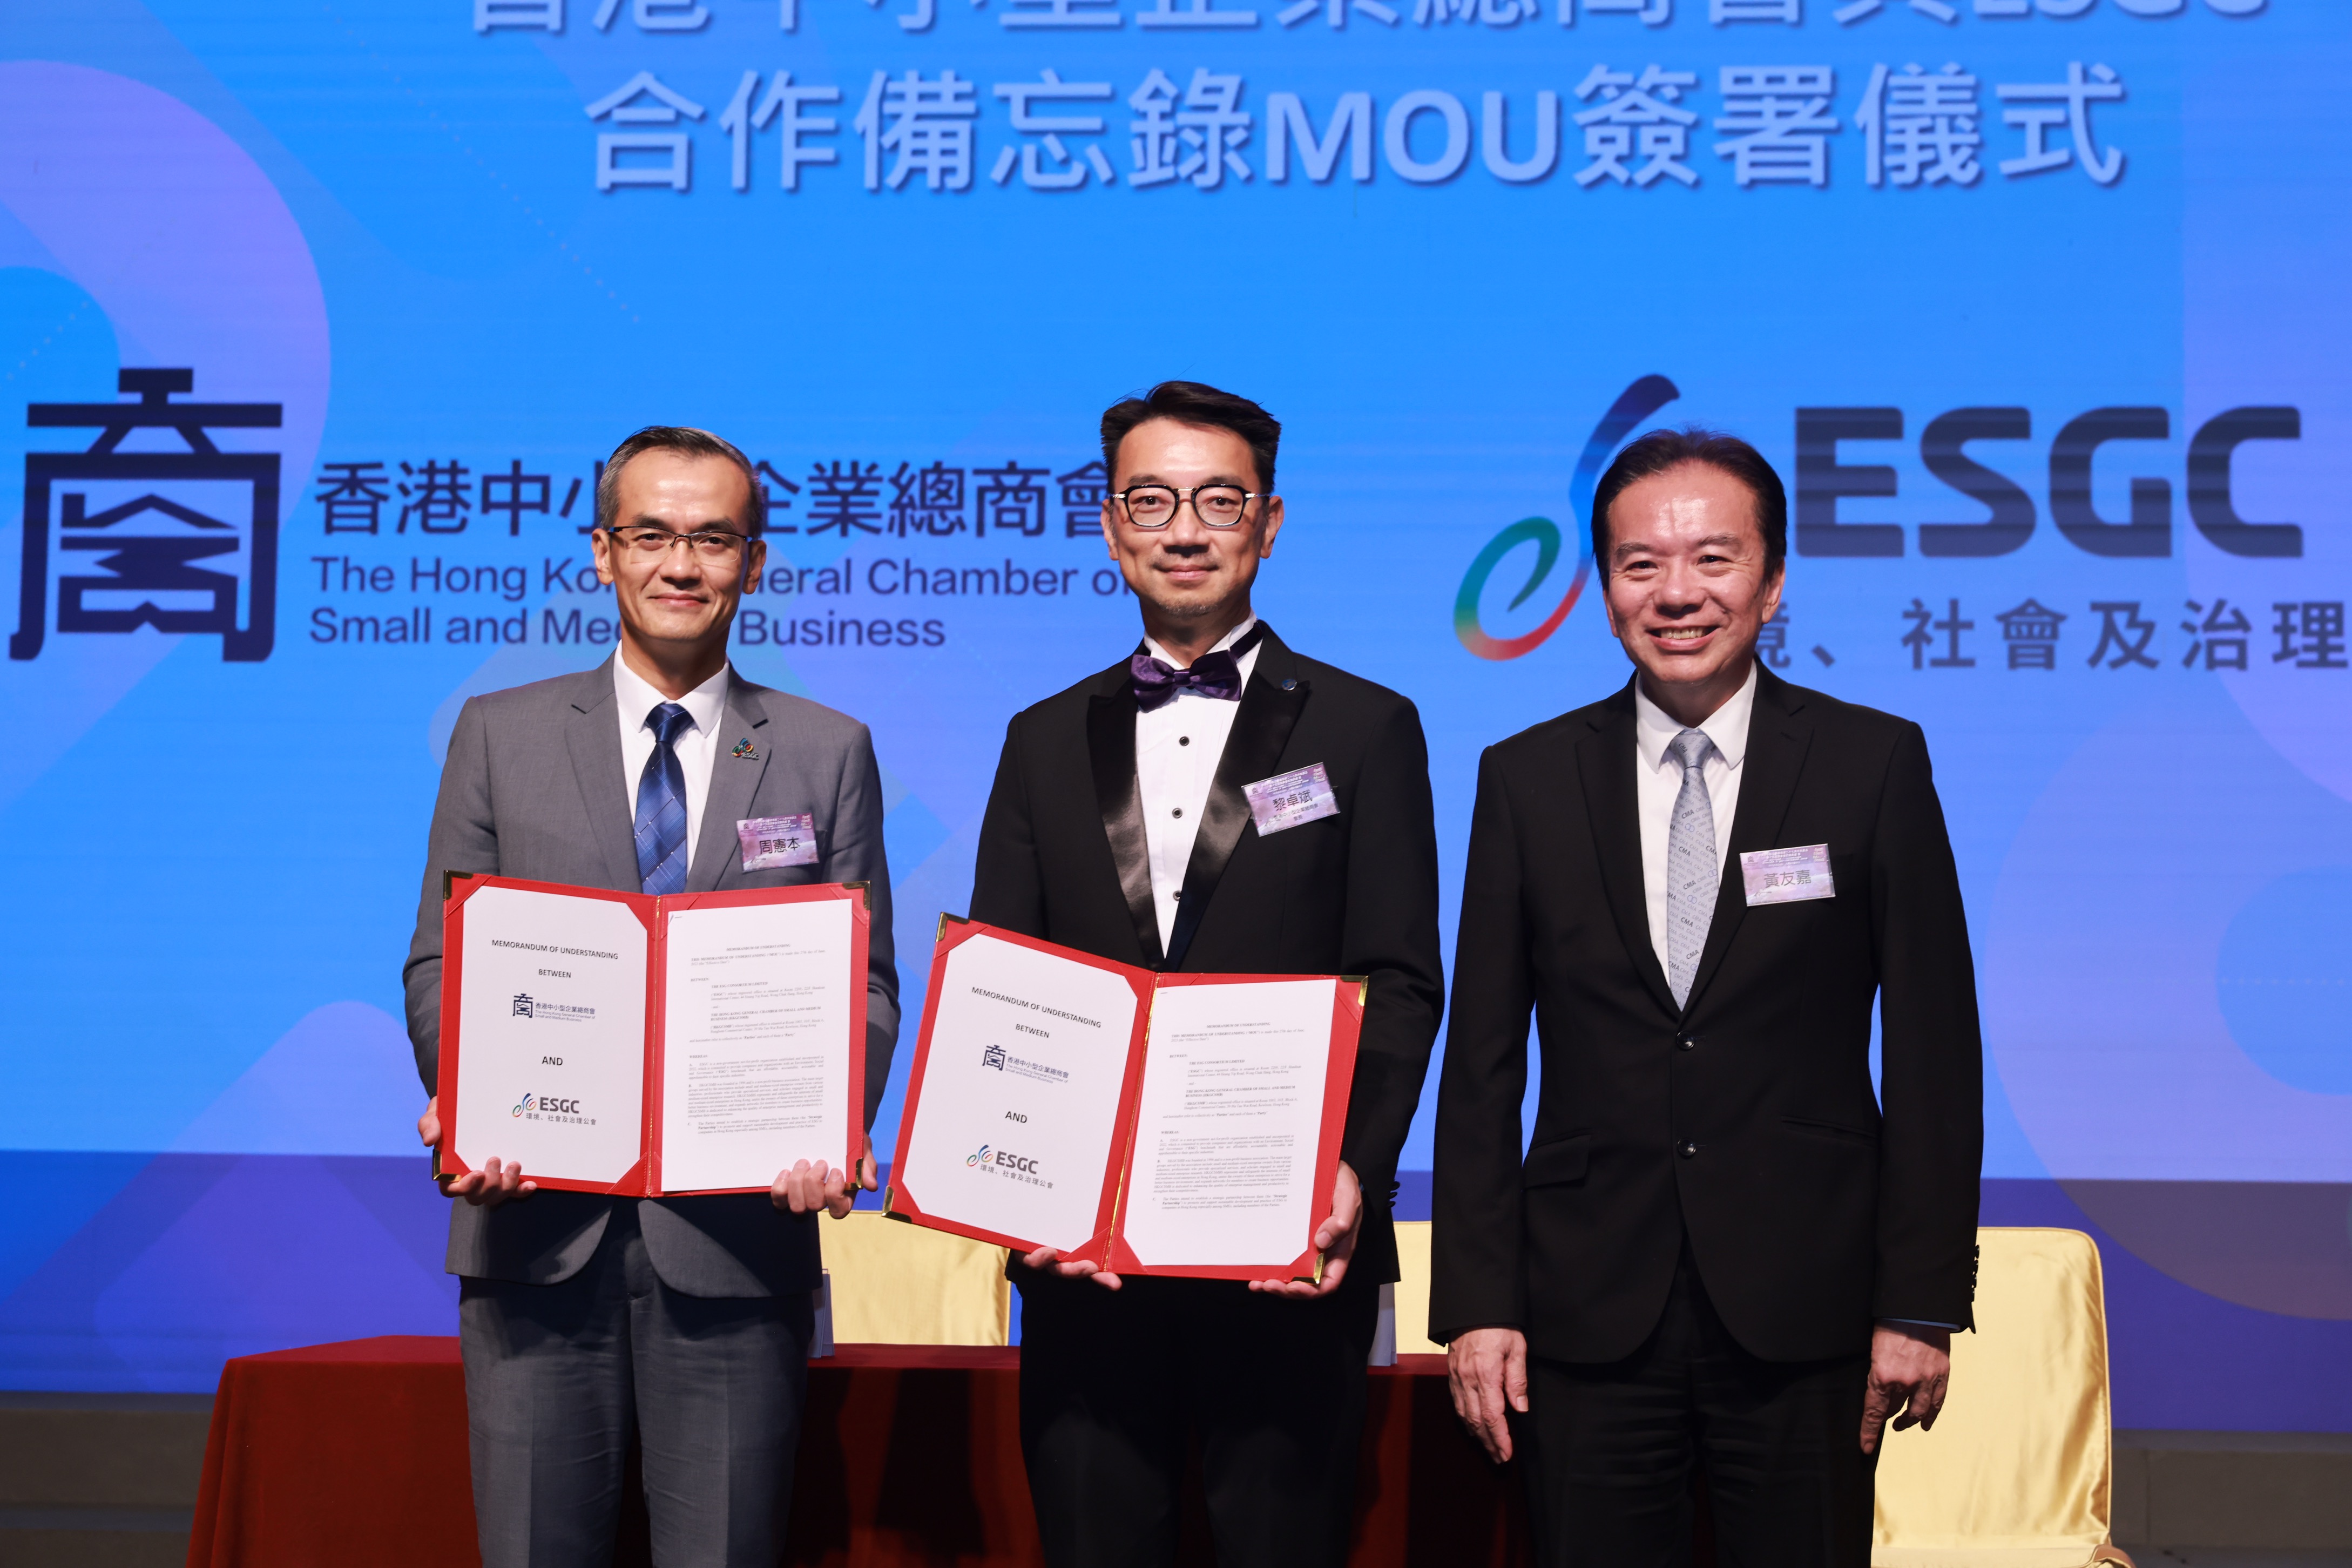 The ESG Consortium and The Hong Kong General Chamber of Small and Medium Business (HKGCSMB) Signed MOU at the HKGCSMB Annual Dinner